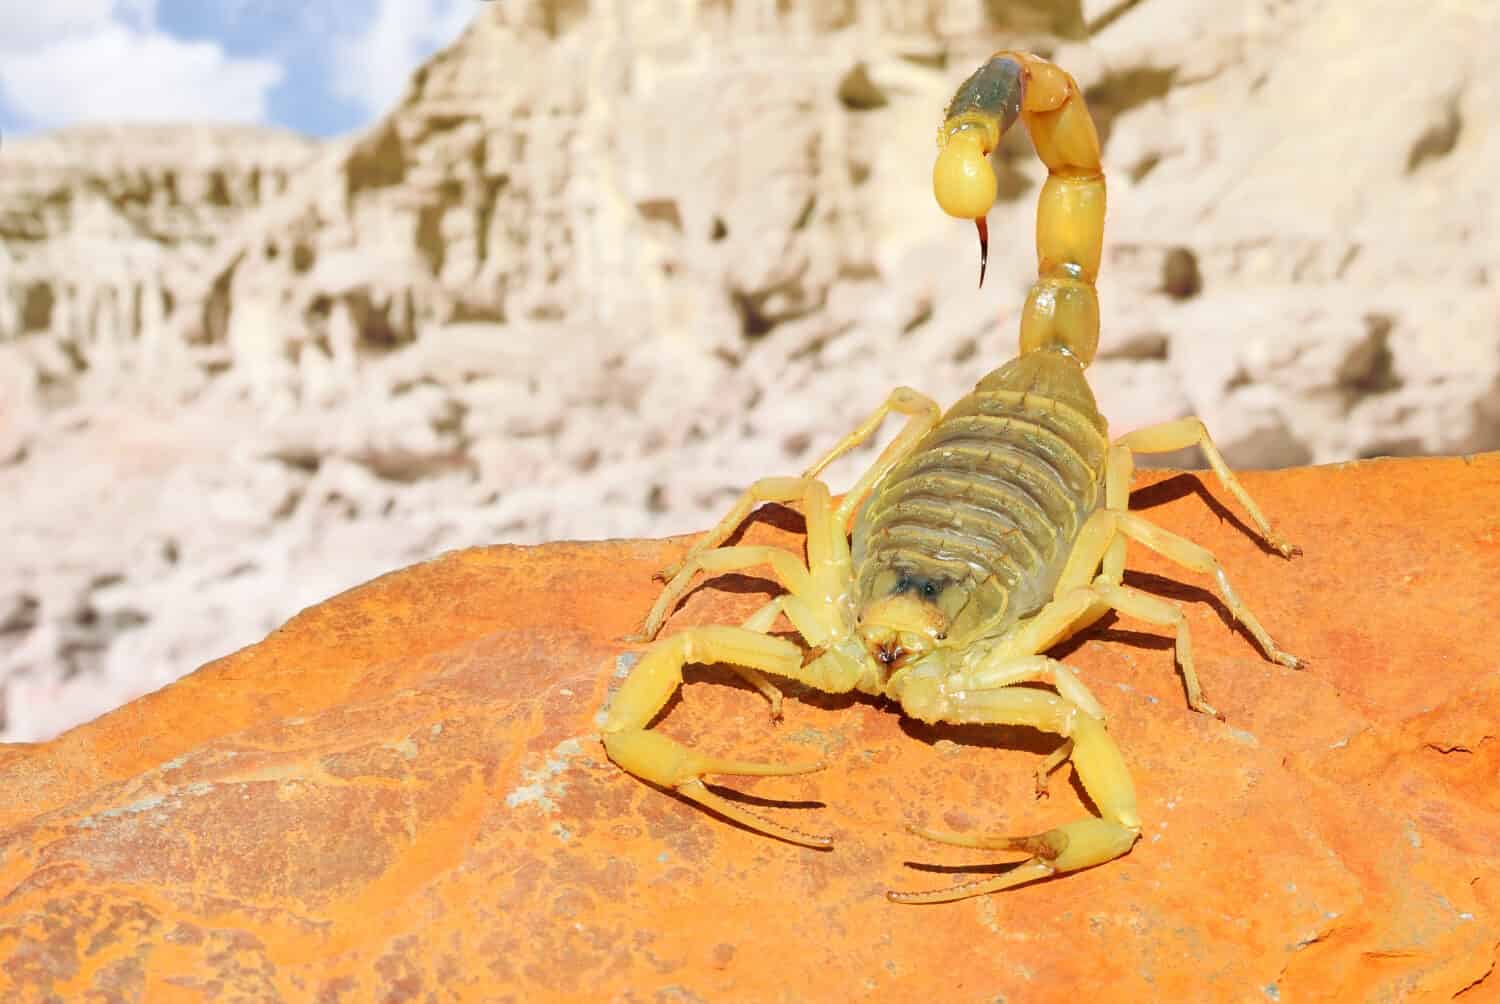 Palestine yellow scorpion or Deathstalker, Leiurus quinquestriatus on red sand stone with mountain of colored stony desert landscape in soft background. Close up